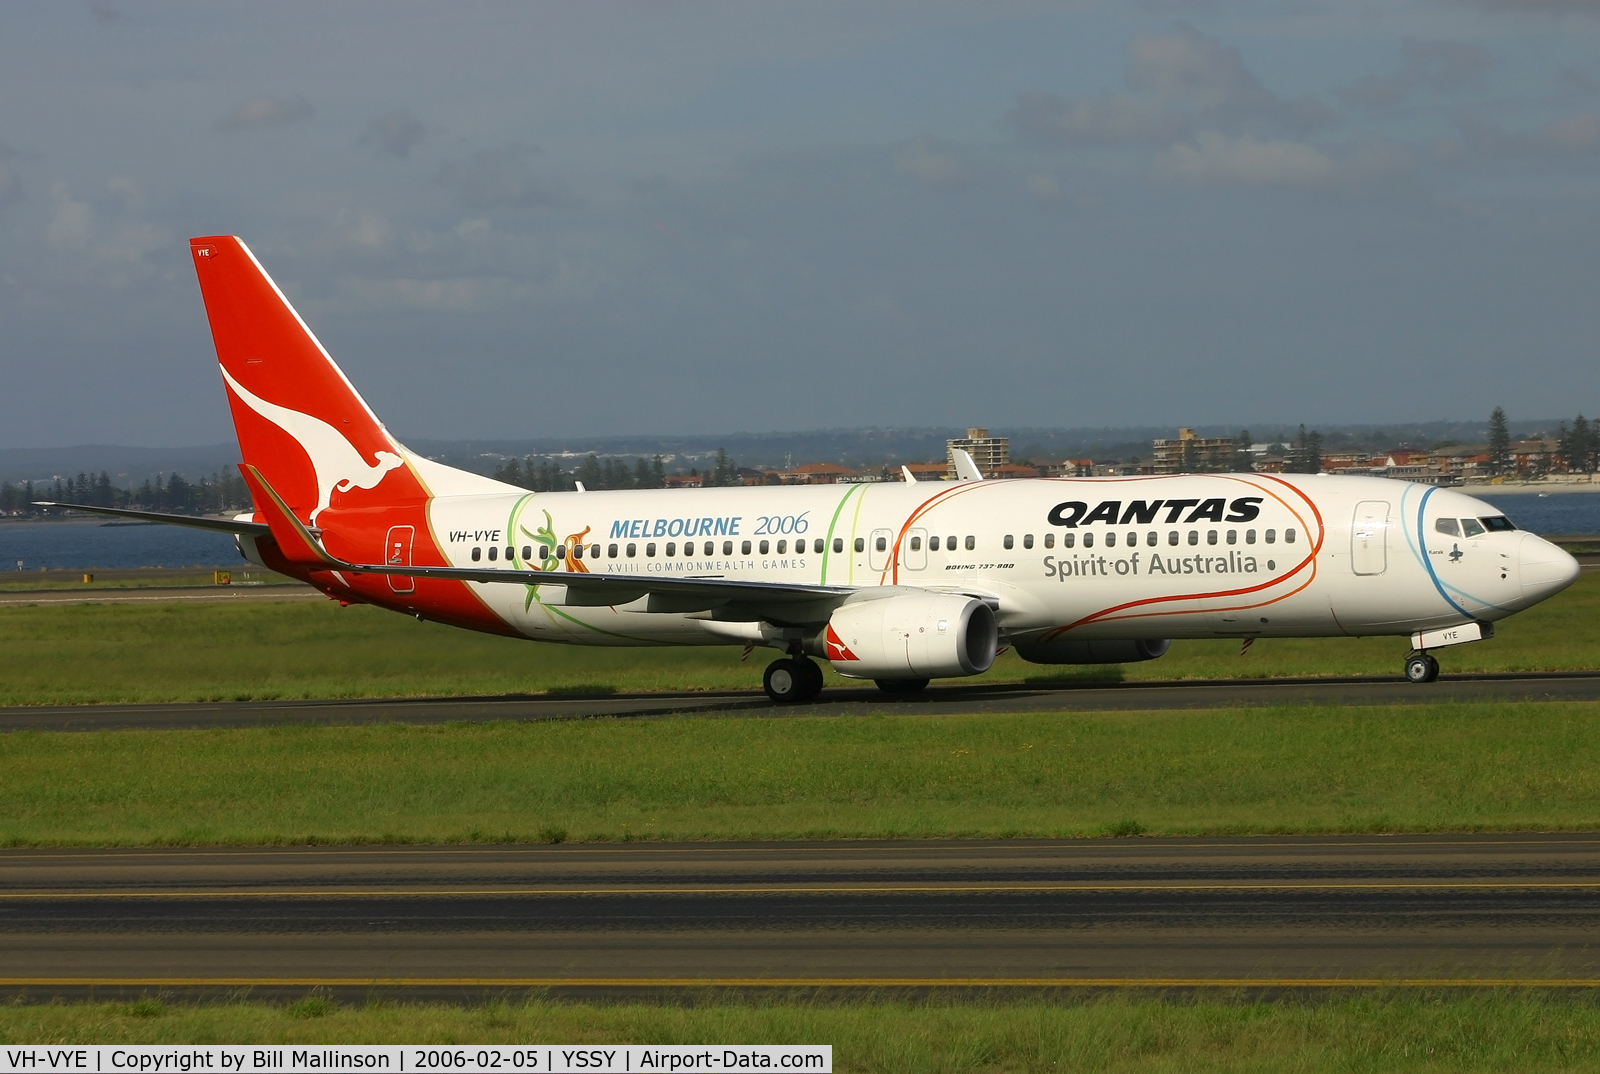 VH-VYE, 2005 Boeing 737-838 C/N 33993, early morning taxi after arrival on 34R